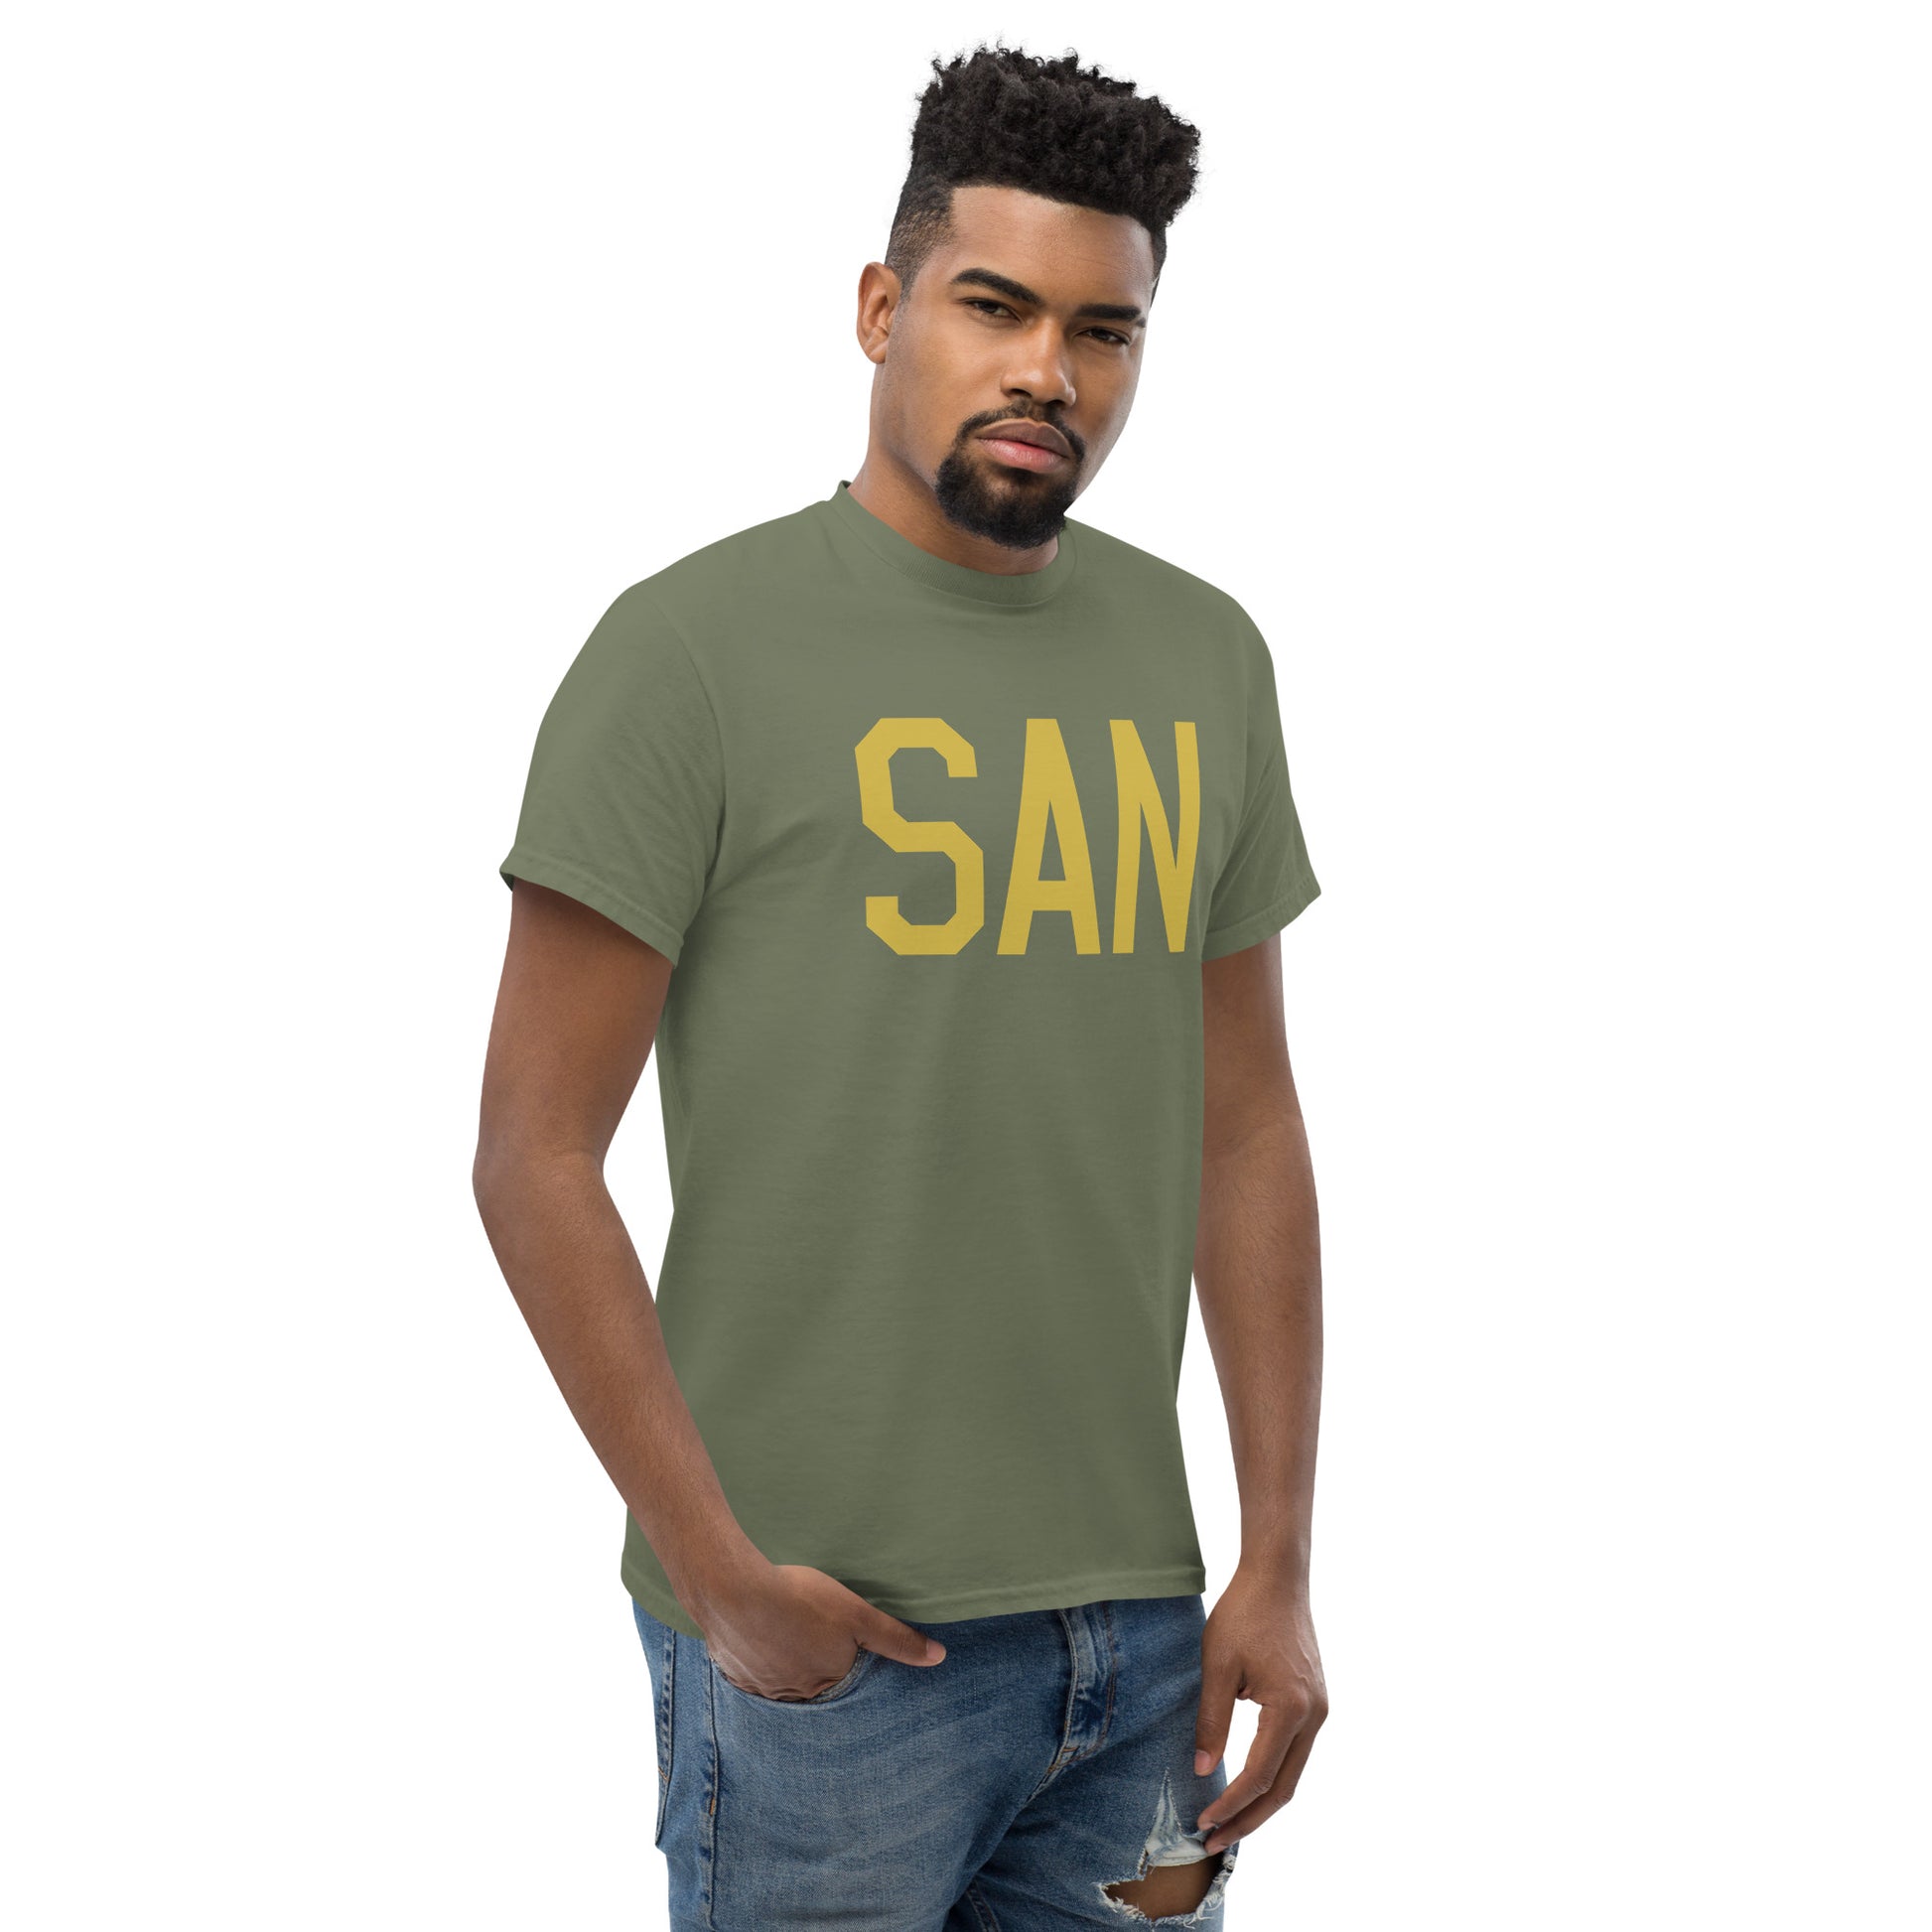 Aviation Enthusiast Men's Tee - Old Gold Graphic • SAN San Diego • YHM Designs - Image 08